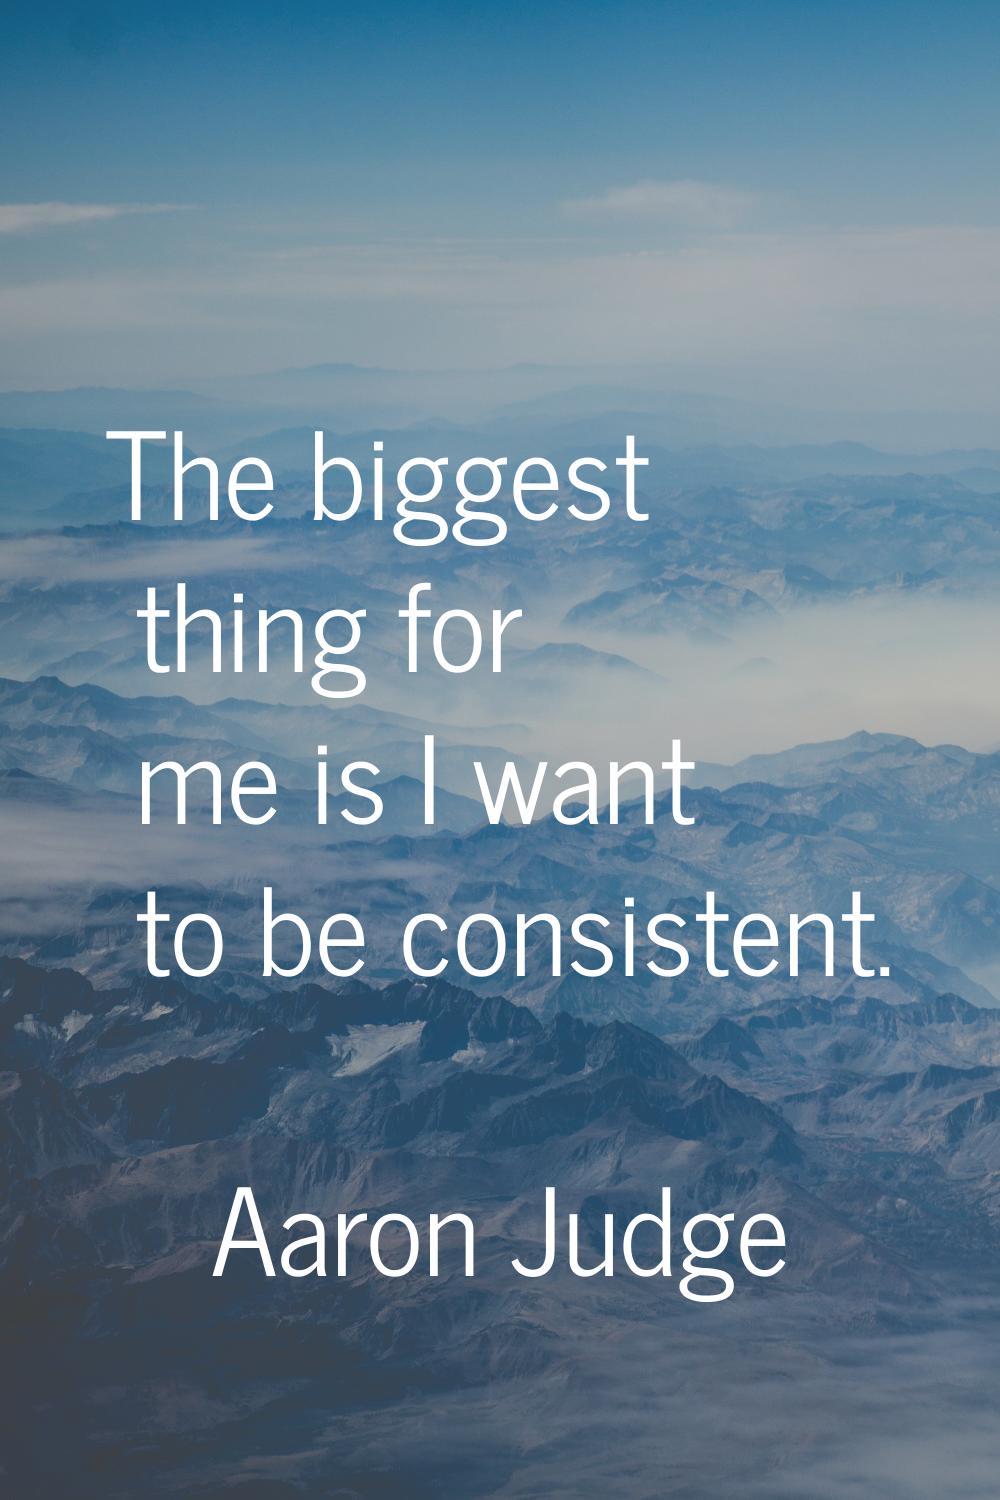 The biggest thing for me is I want to be consistent.